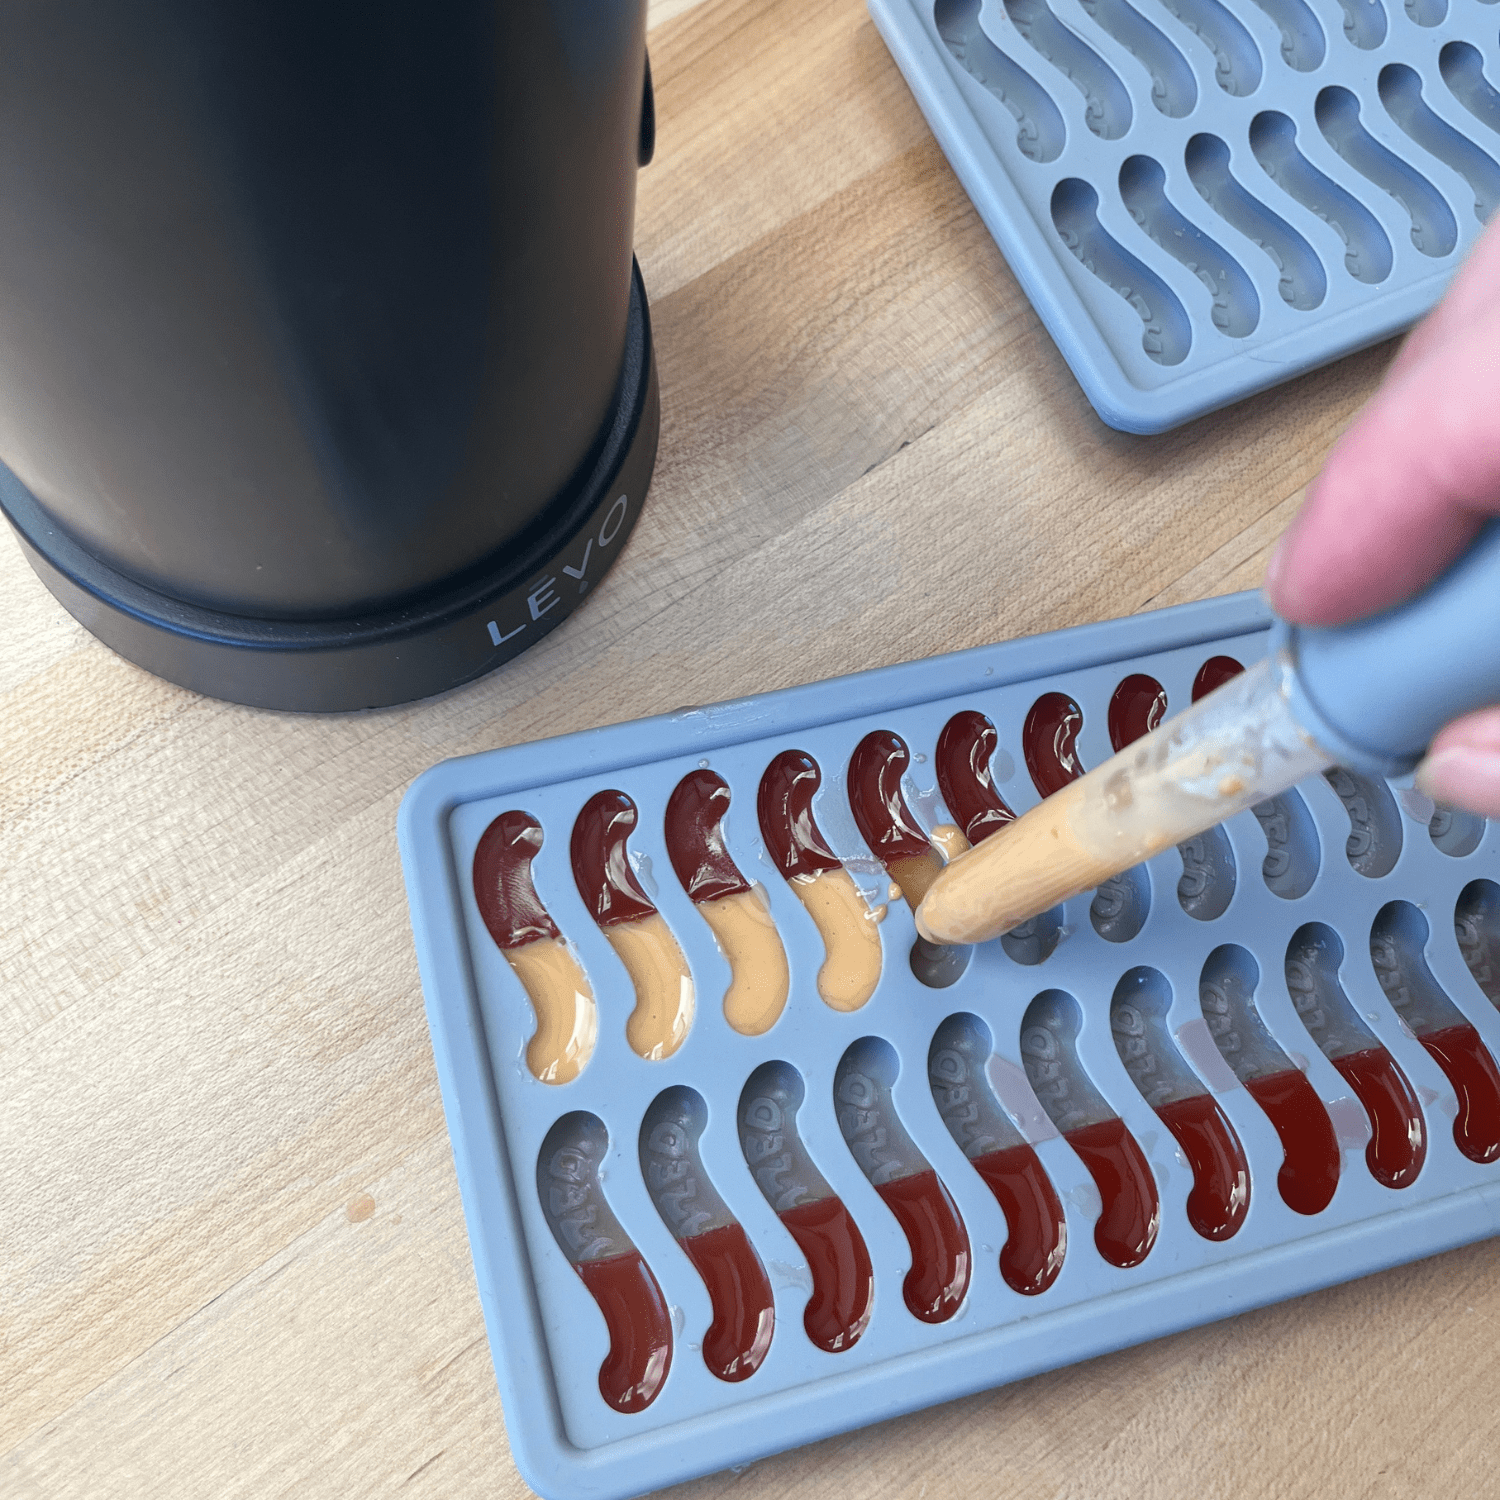 LĒVO Gummy Worm Silicone Candy Molds - Set of 2 Candy Mold Trays with  Dividers & Snap On Lids - Make Your Own Two Tone Gummy Worms - For Your  LĒVO